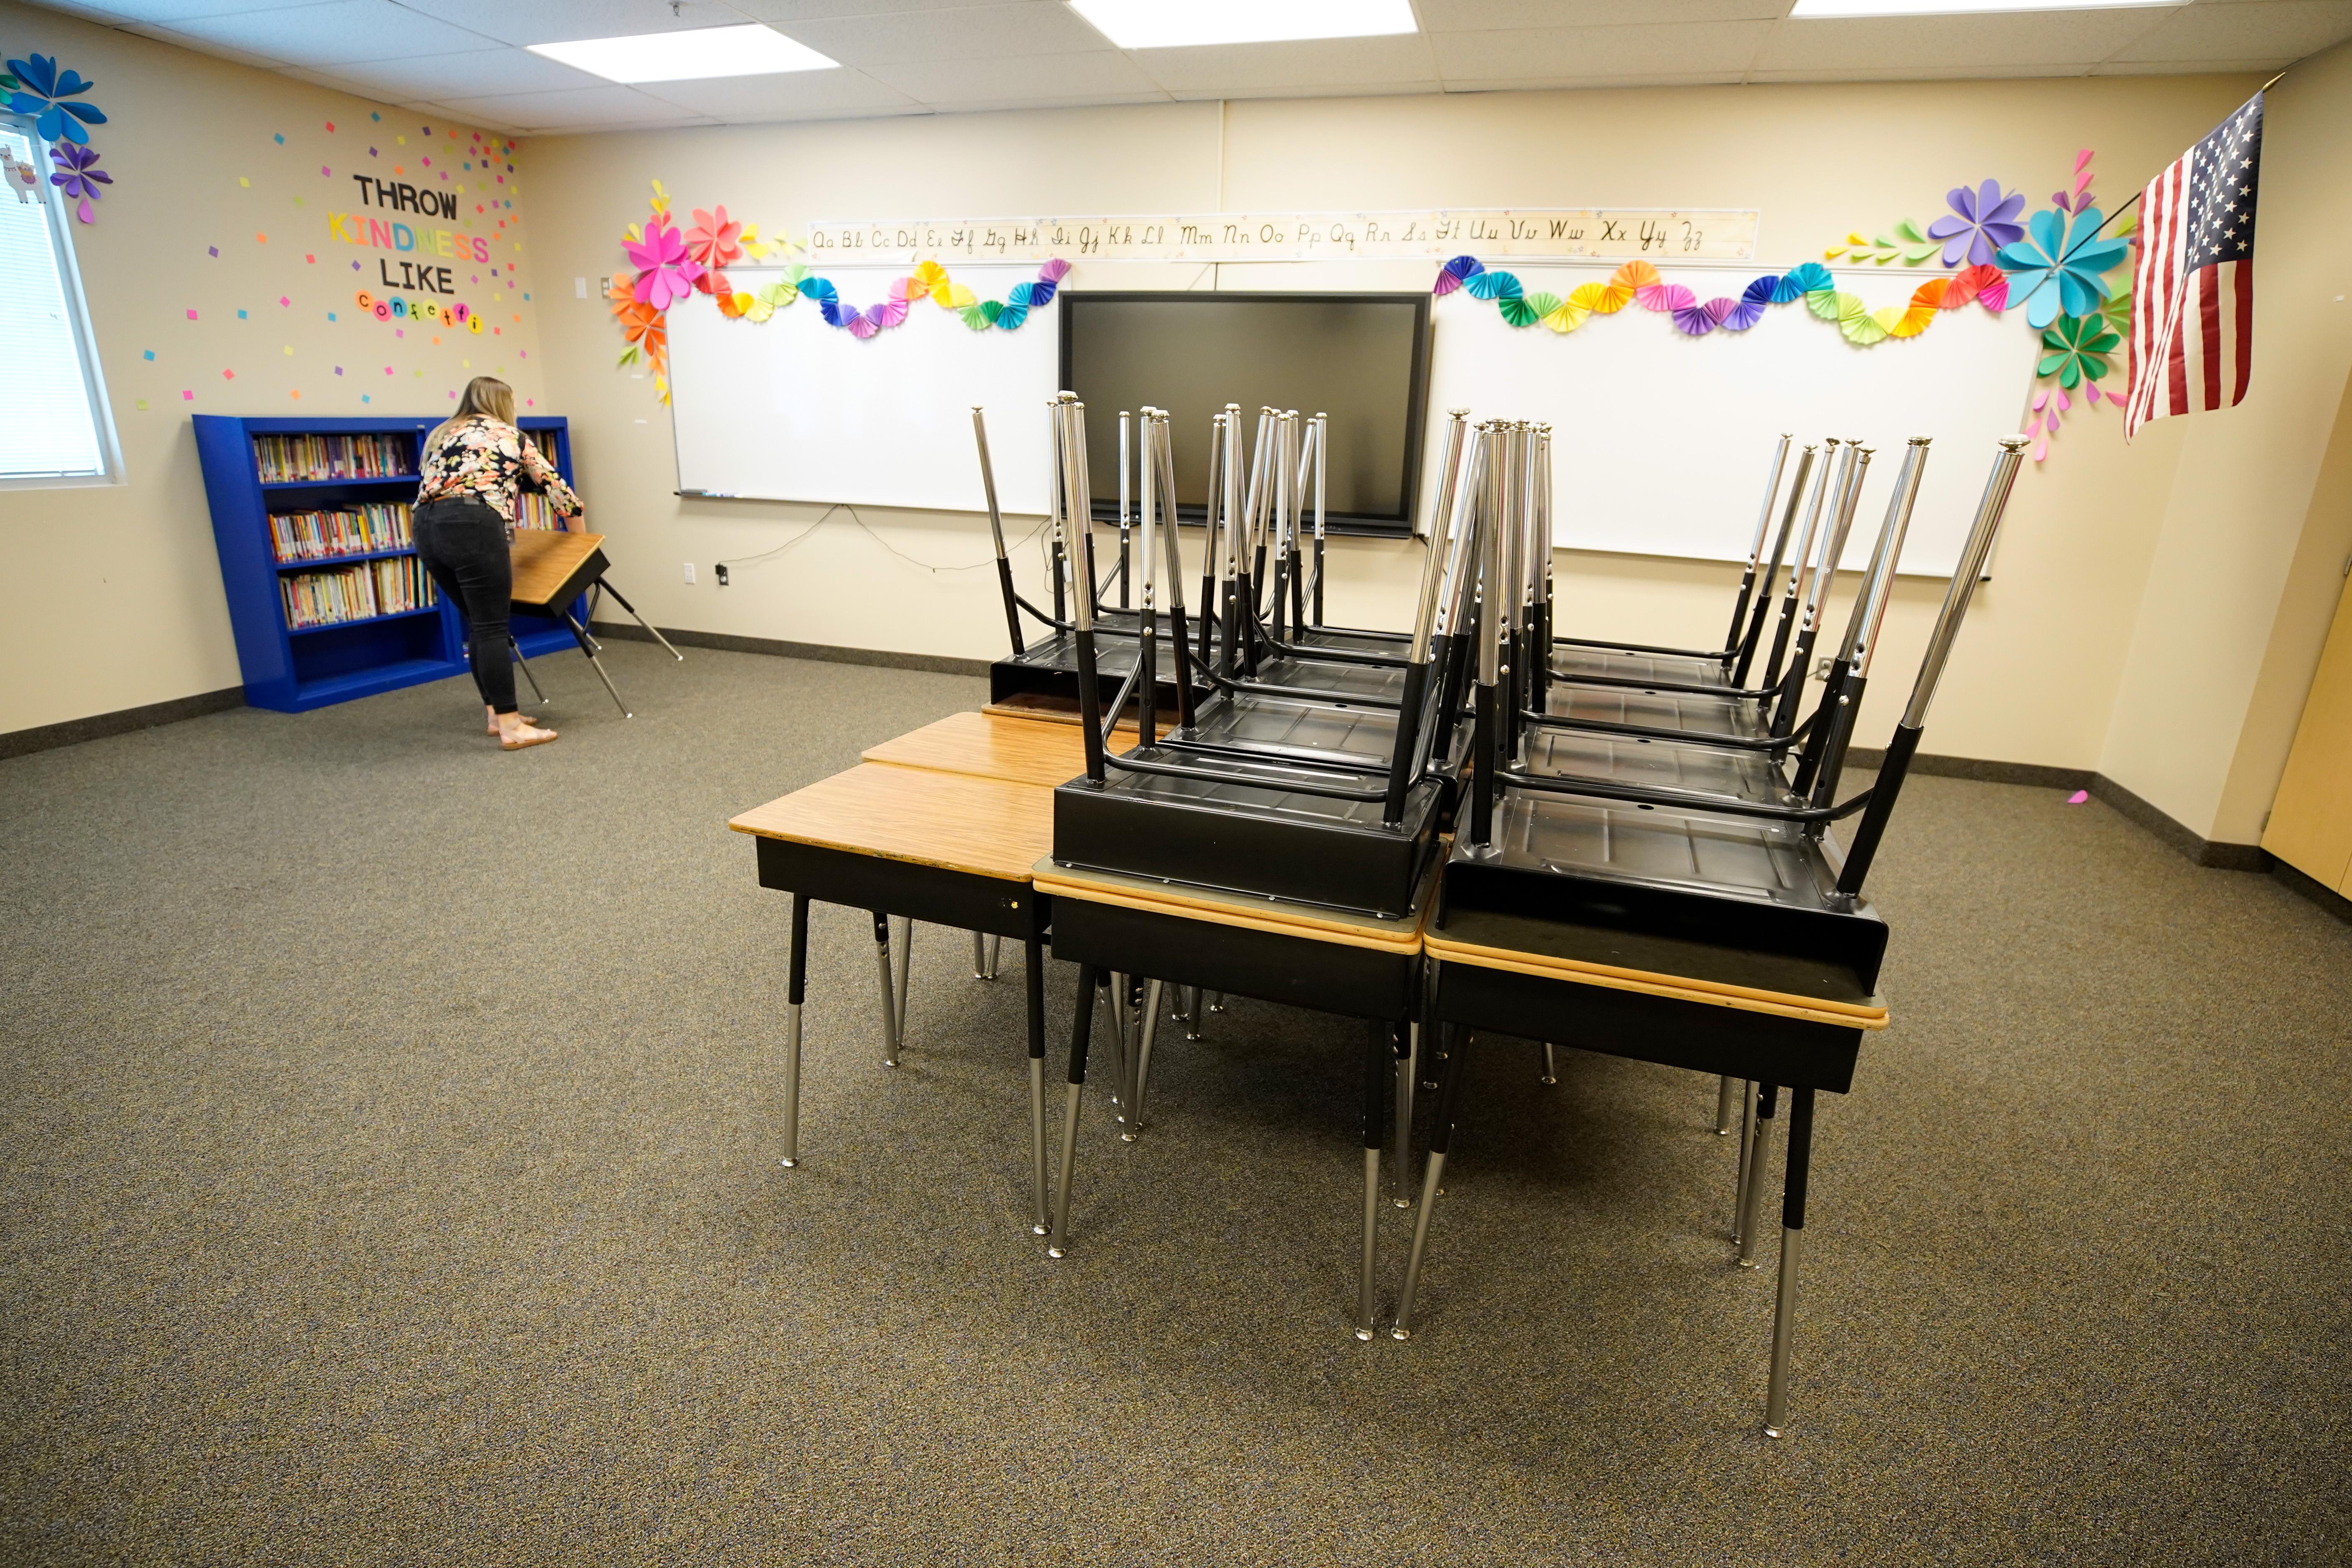 A teacher starts to reset up her classrooms with new rules on social distancing at Freedom Preparatory Academy as they begin to prepare to restart school after it was closed in March due to COVID-19 on August 5, 2020 in Provo, Utah.